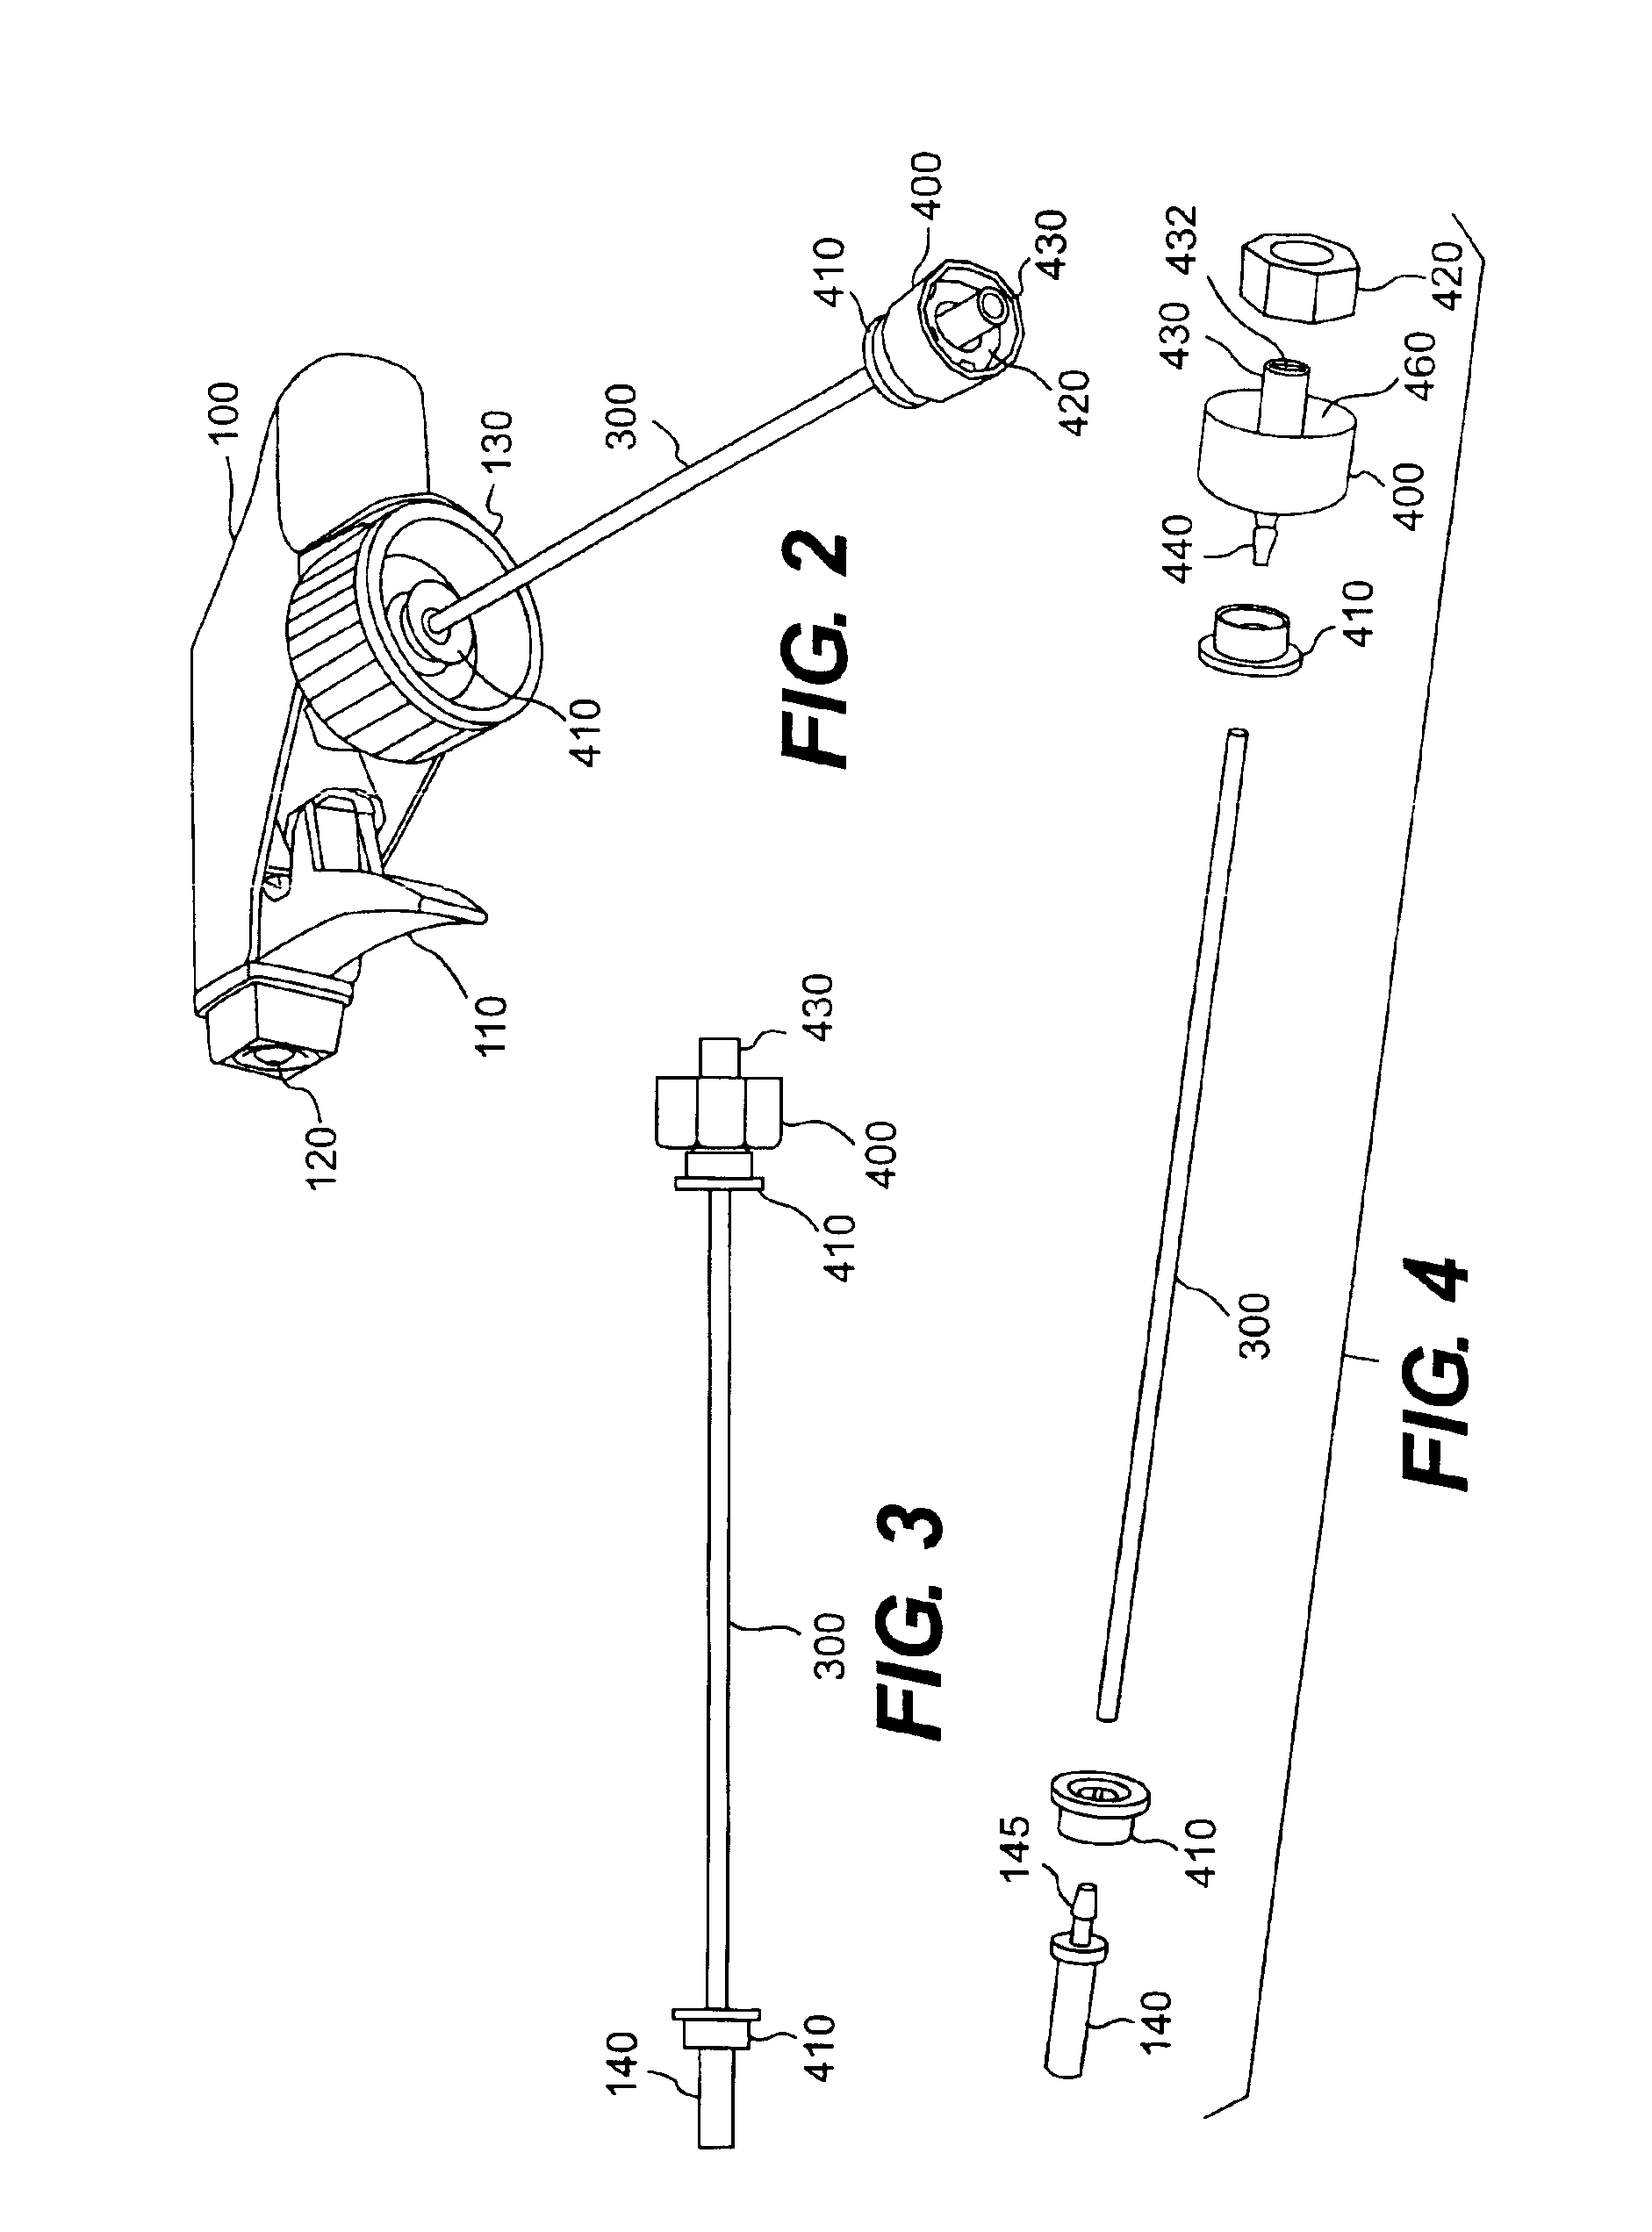 Flexible supply tube with weighting mechanism for use in spray bottles